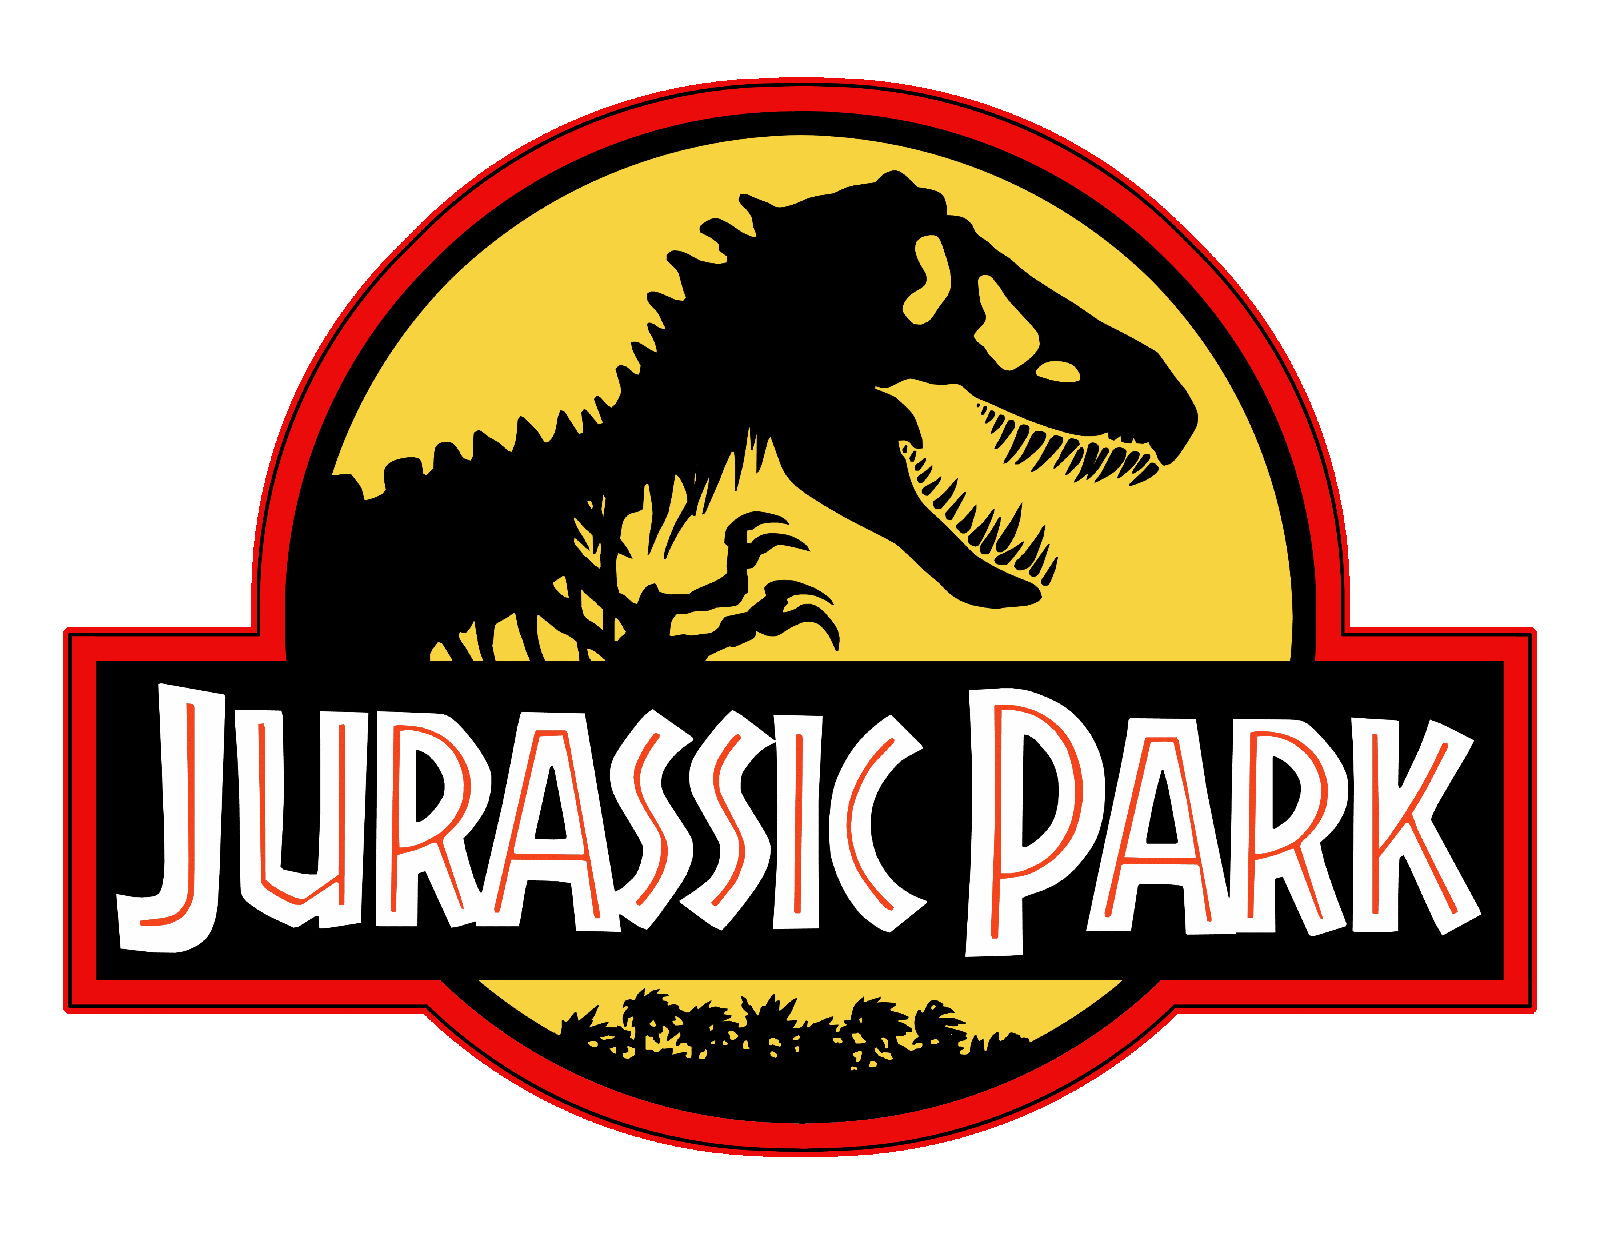 Jurassic Logo - Jurassic Park Logo, Jurassic Park Symbol, Meaning, History and Evolution